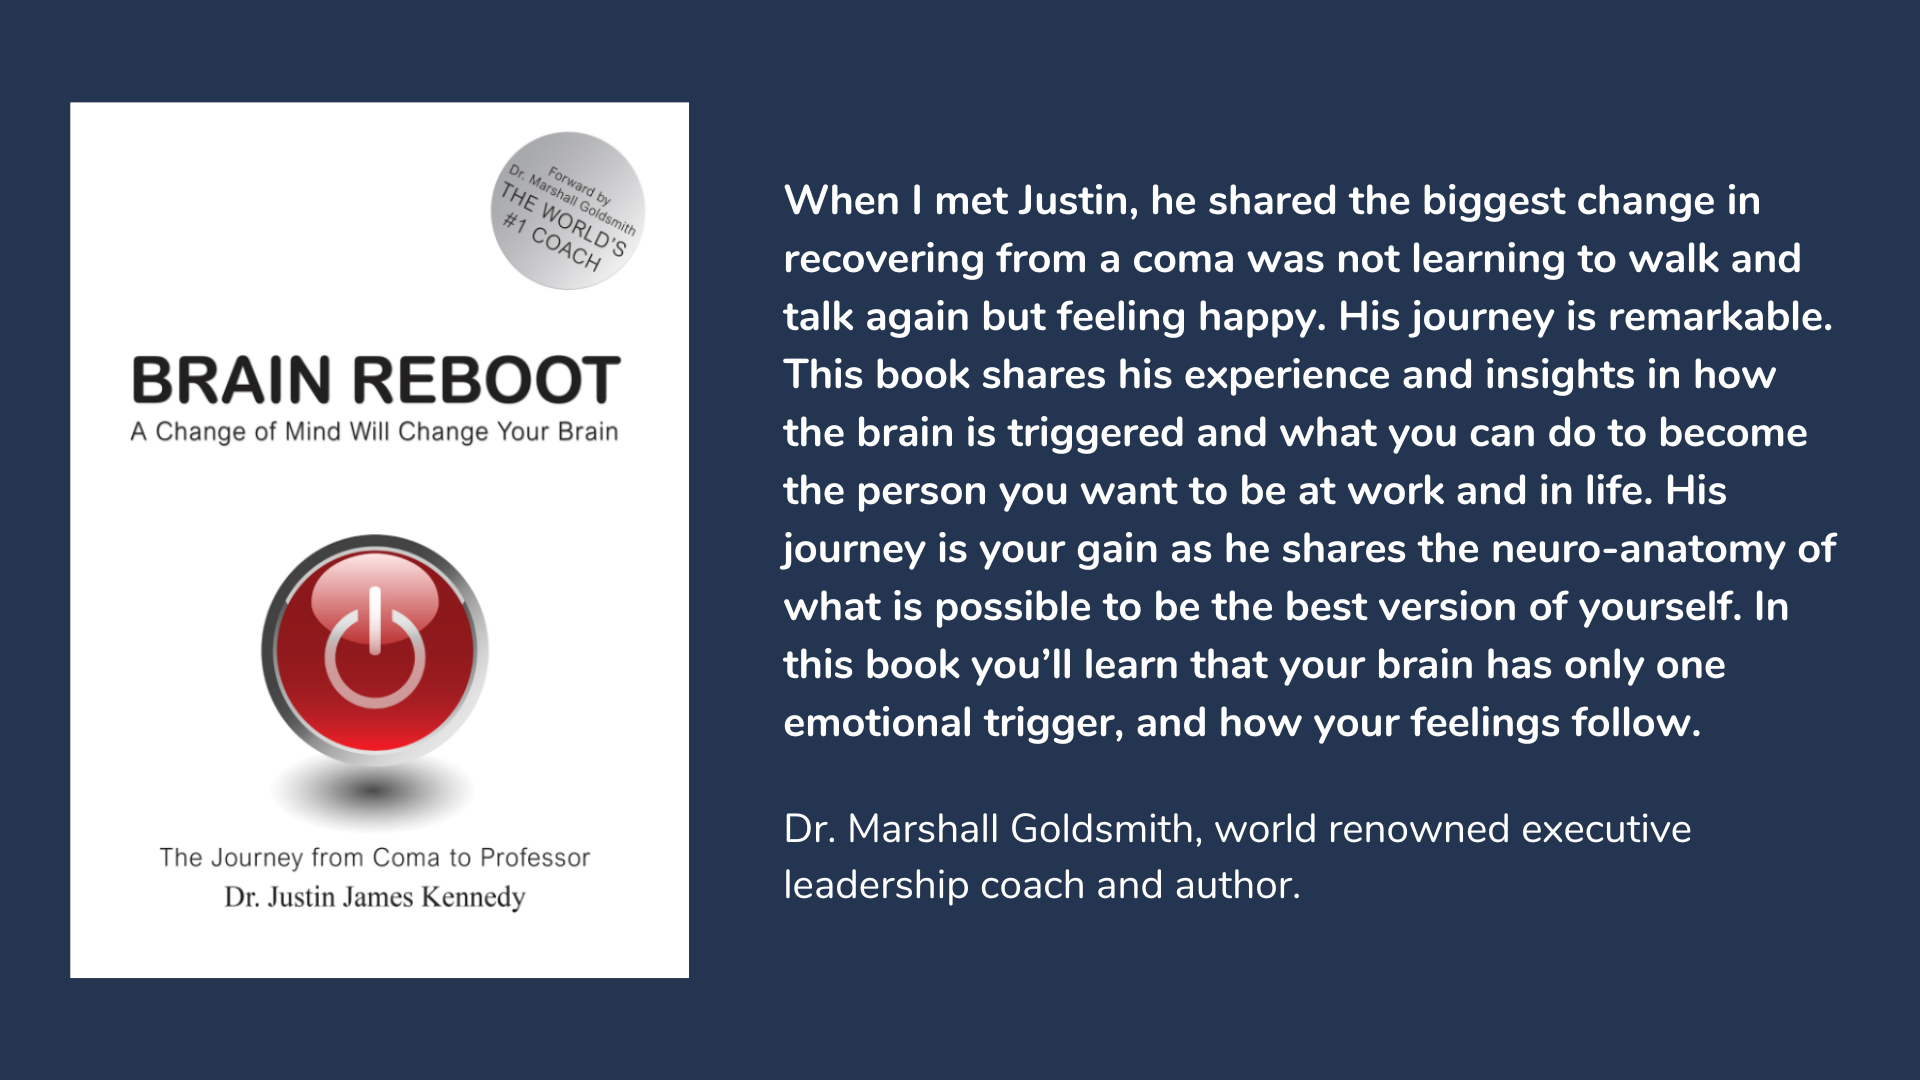 Brain Reboot: A Change of Mind Will Change Your Brain, book cover and description.